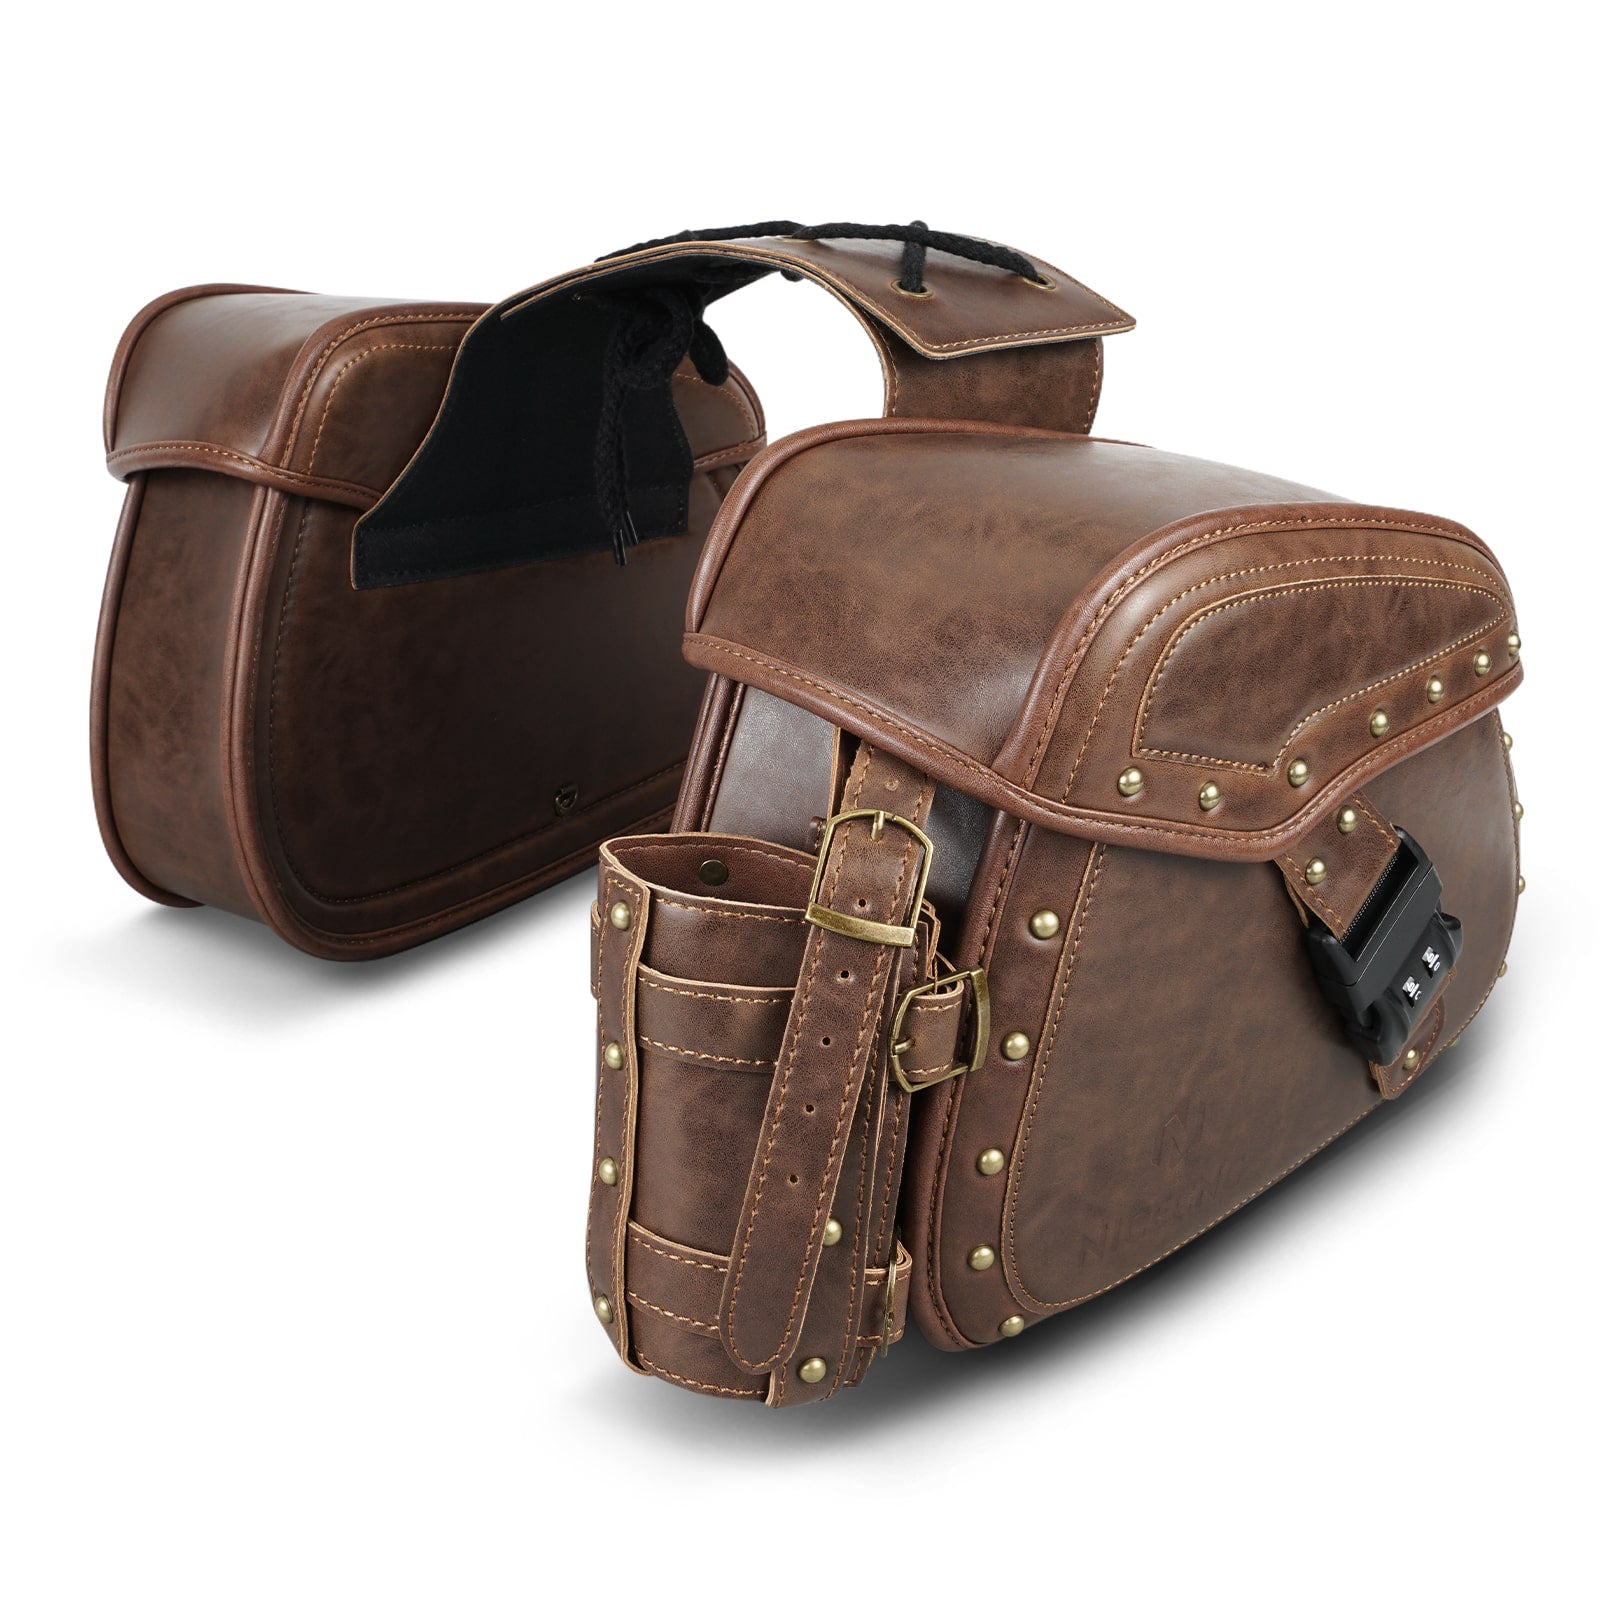 PU Leather Motorcycle Saddle Bags with Cup Holder & Lock for Universal Motorcycle, Brown